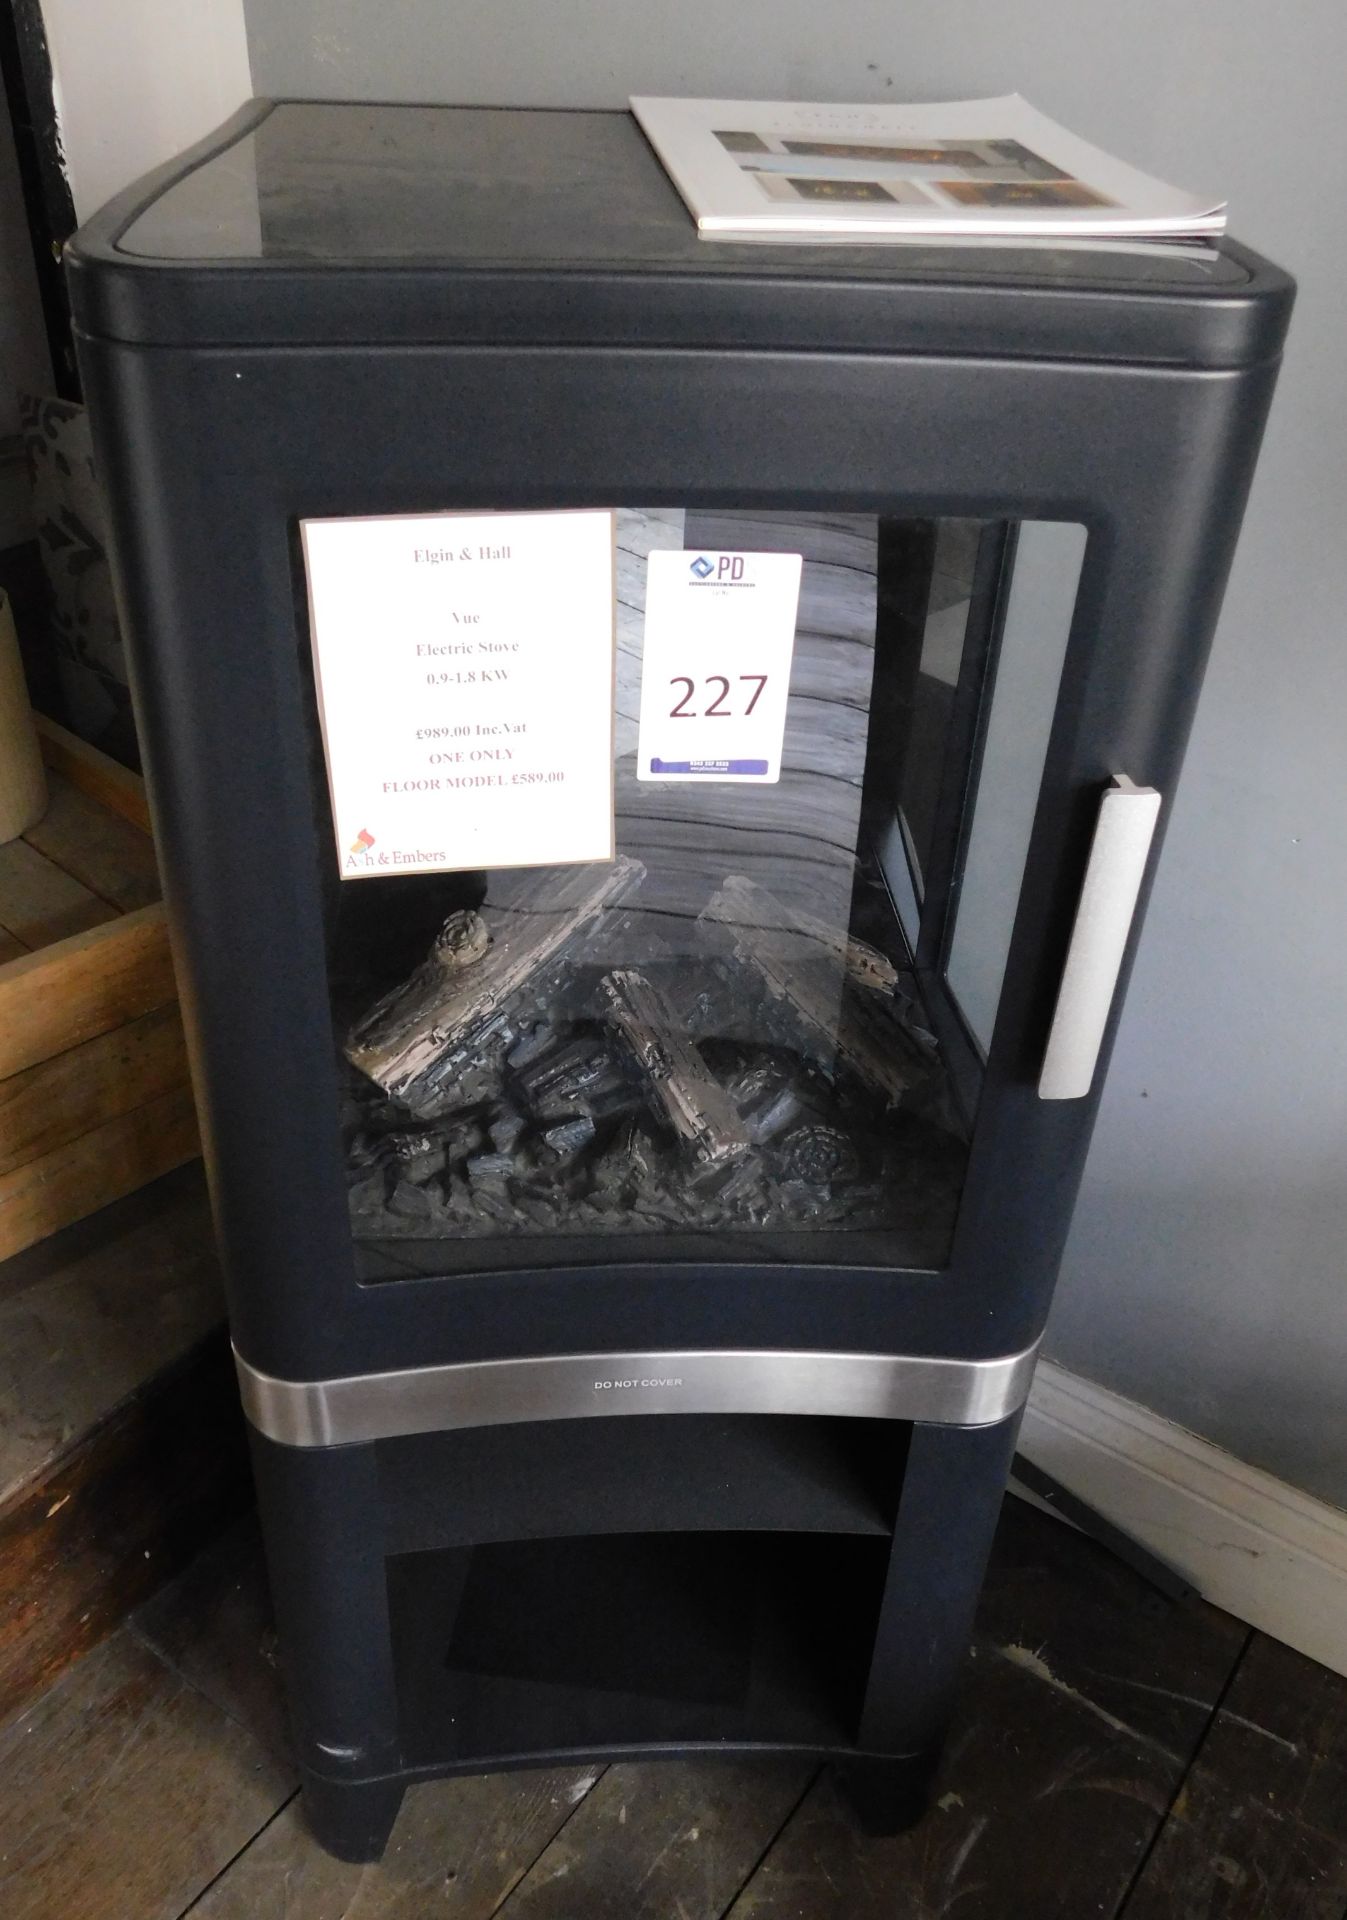 Ex-Display Elgin & Hall “Vue” .9 – 1.8kw Electric Stove (Where the company’s description/price